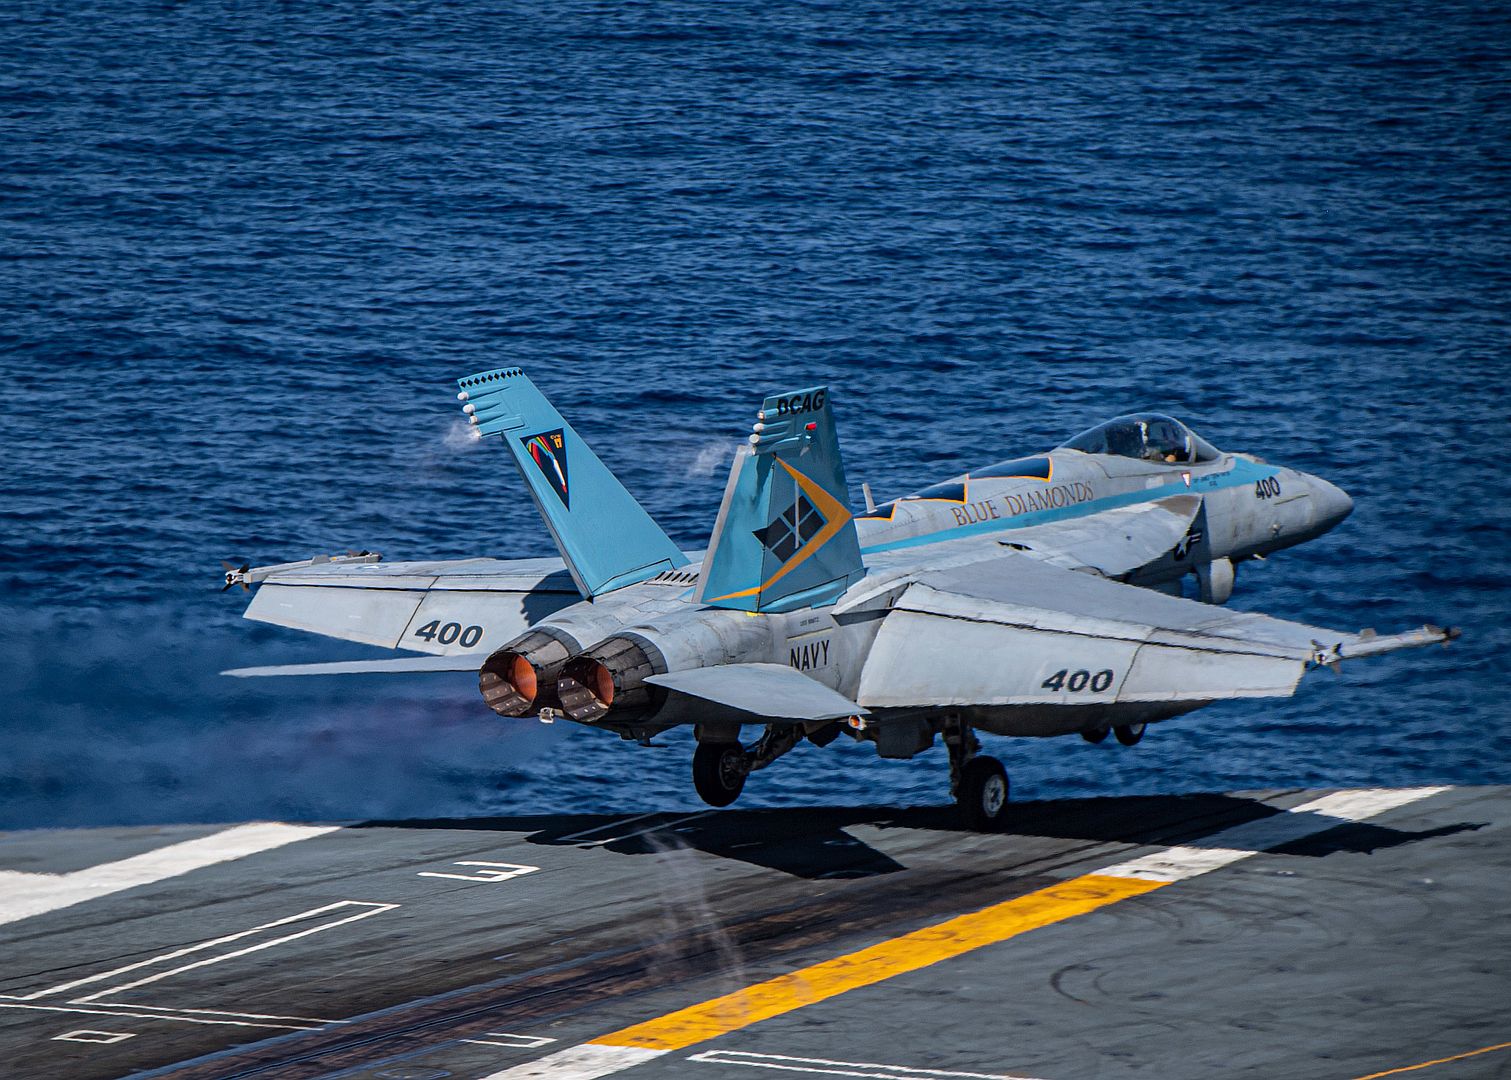 18E Super Hornet From The Blue Diamonds Of Strike Fighter Squadron 146 Launches From The Flight Deck Of The Aircraft Carrier USS Nimitz 6J7bBEvBTQrwoWZHnDj9Xp